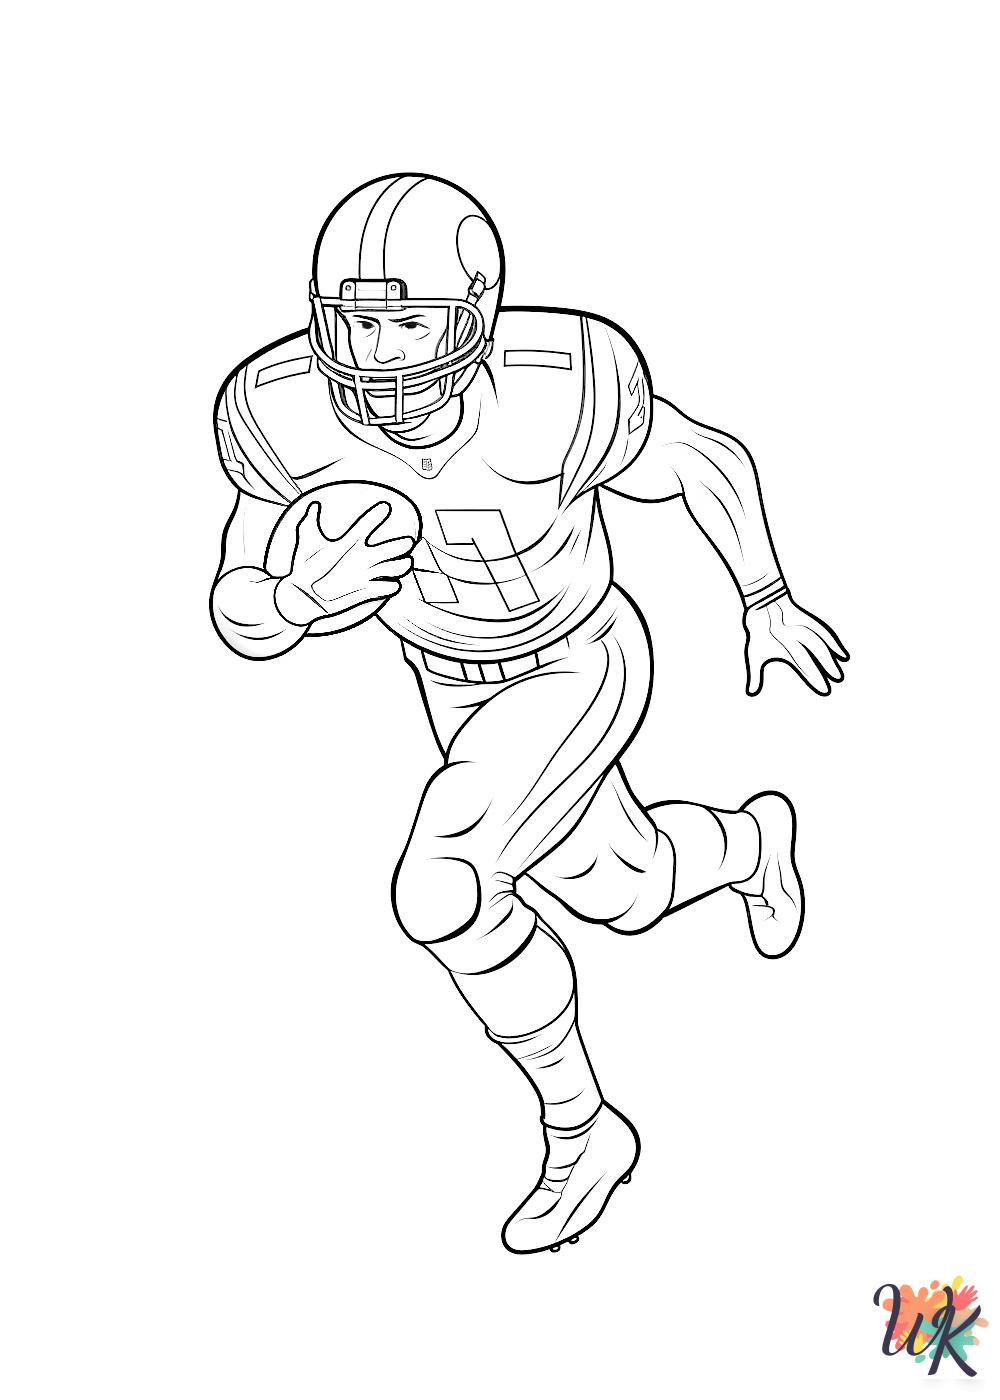 NFL coloring pages printable free